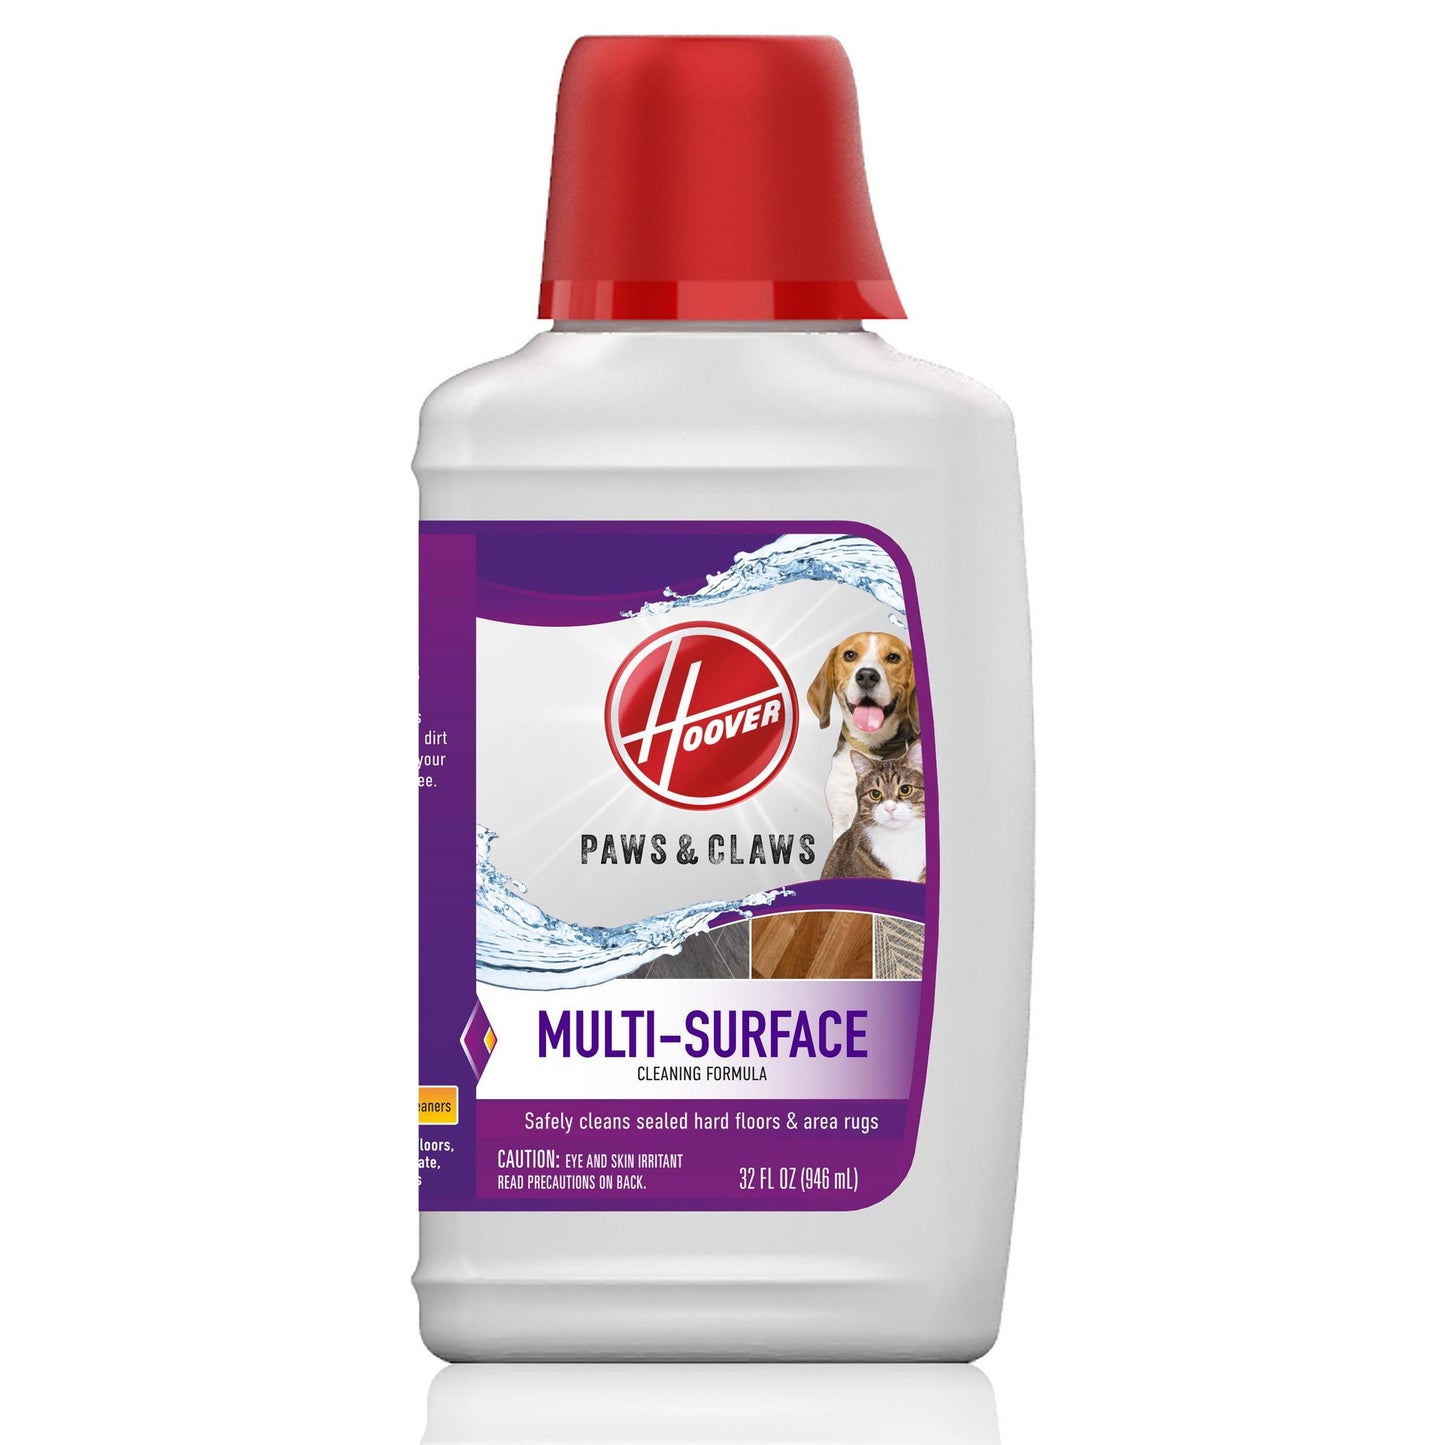 Paws & Claws Multi-Surface Cleaning Formula 32 oz.